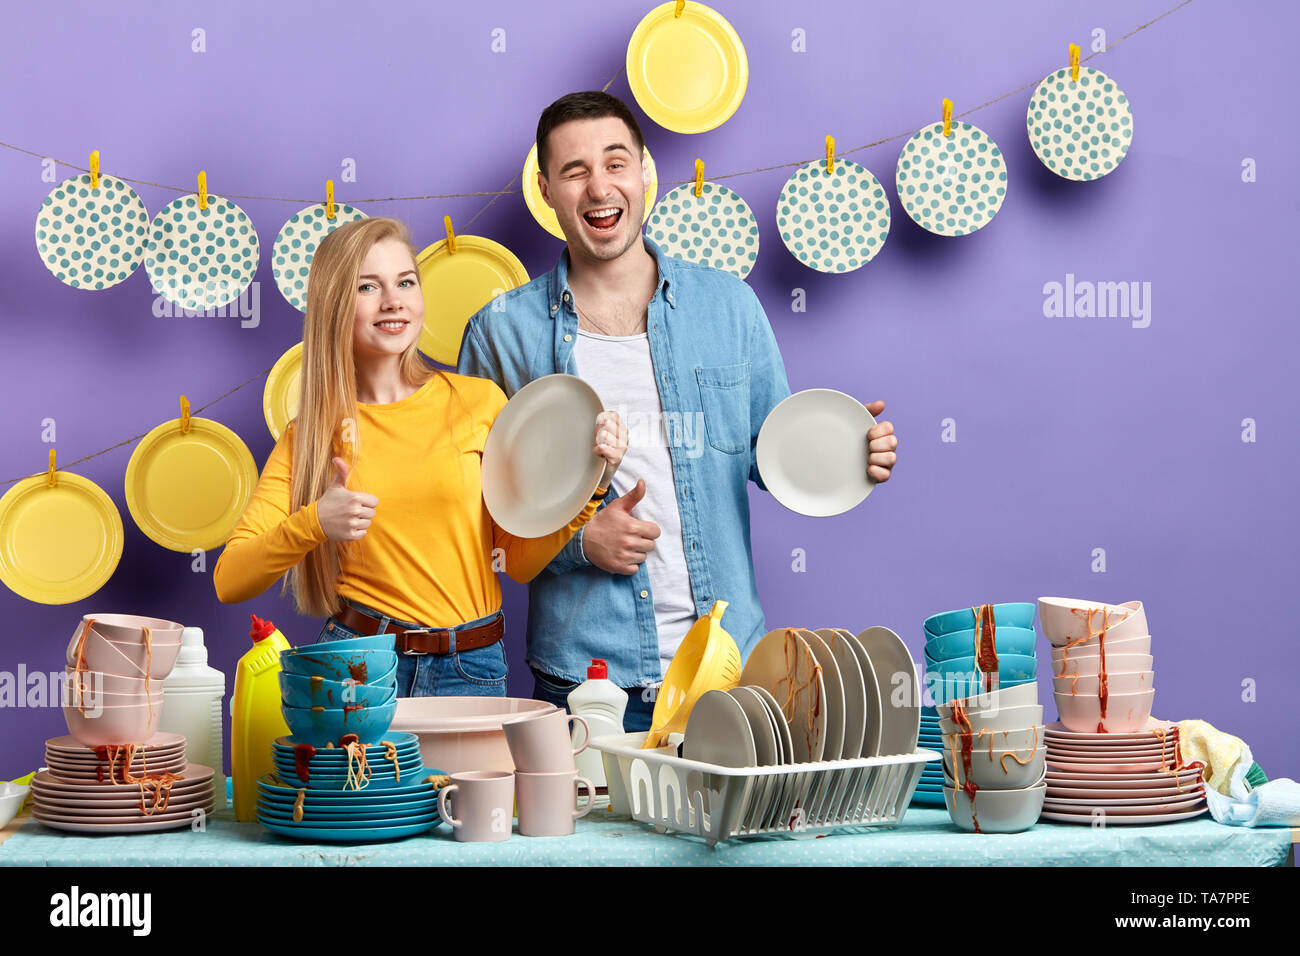 Young smiling woman and man showing thumbs up to the camera, effective good dishwashing liquid for dirty tablewear Stock Photo